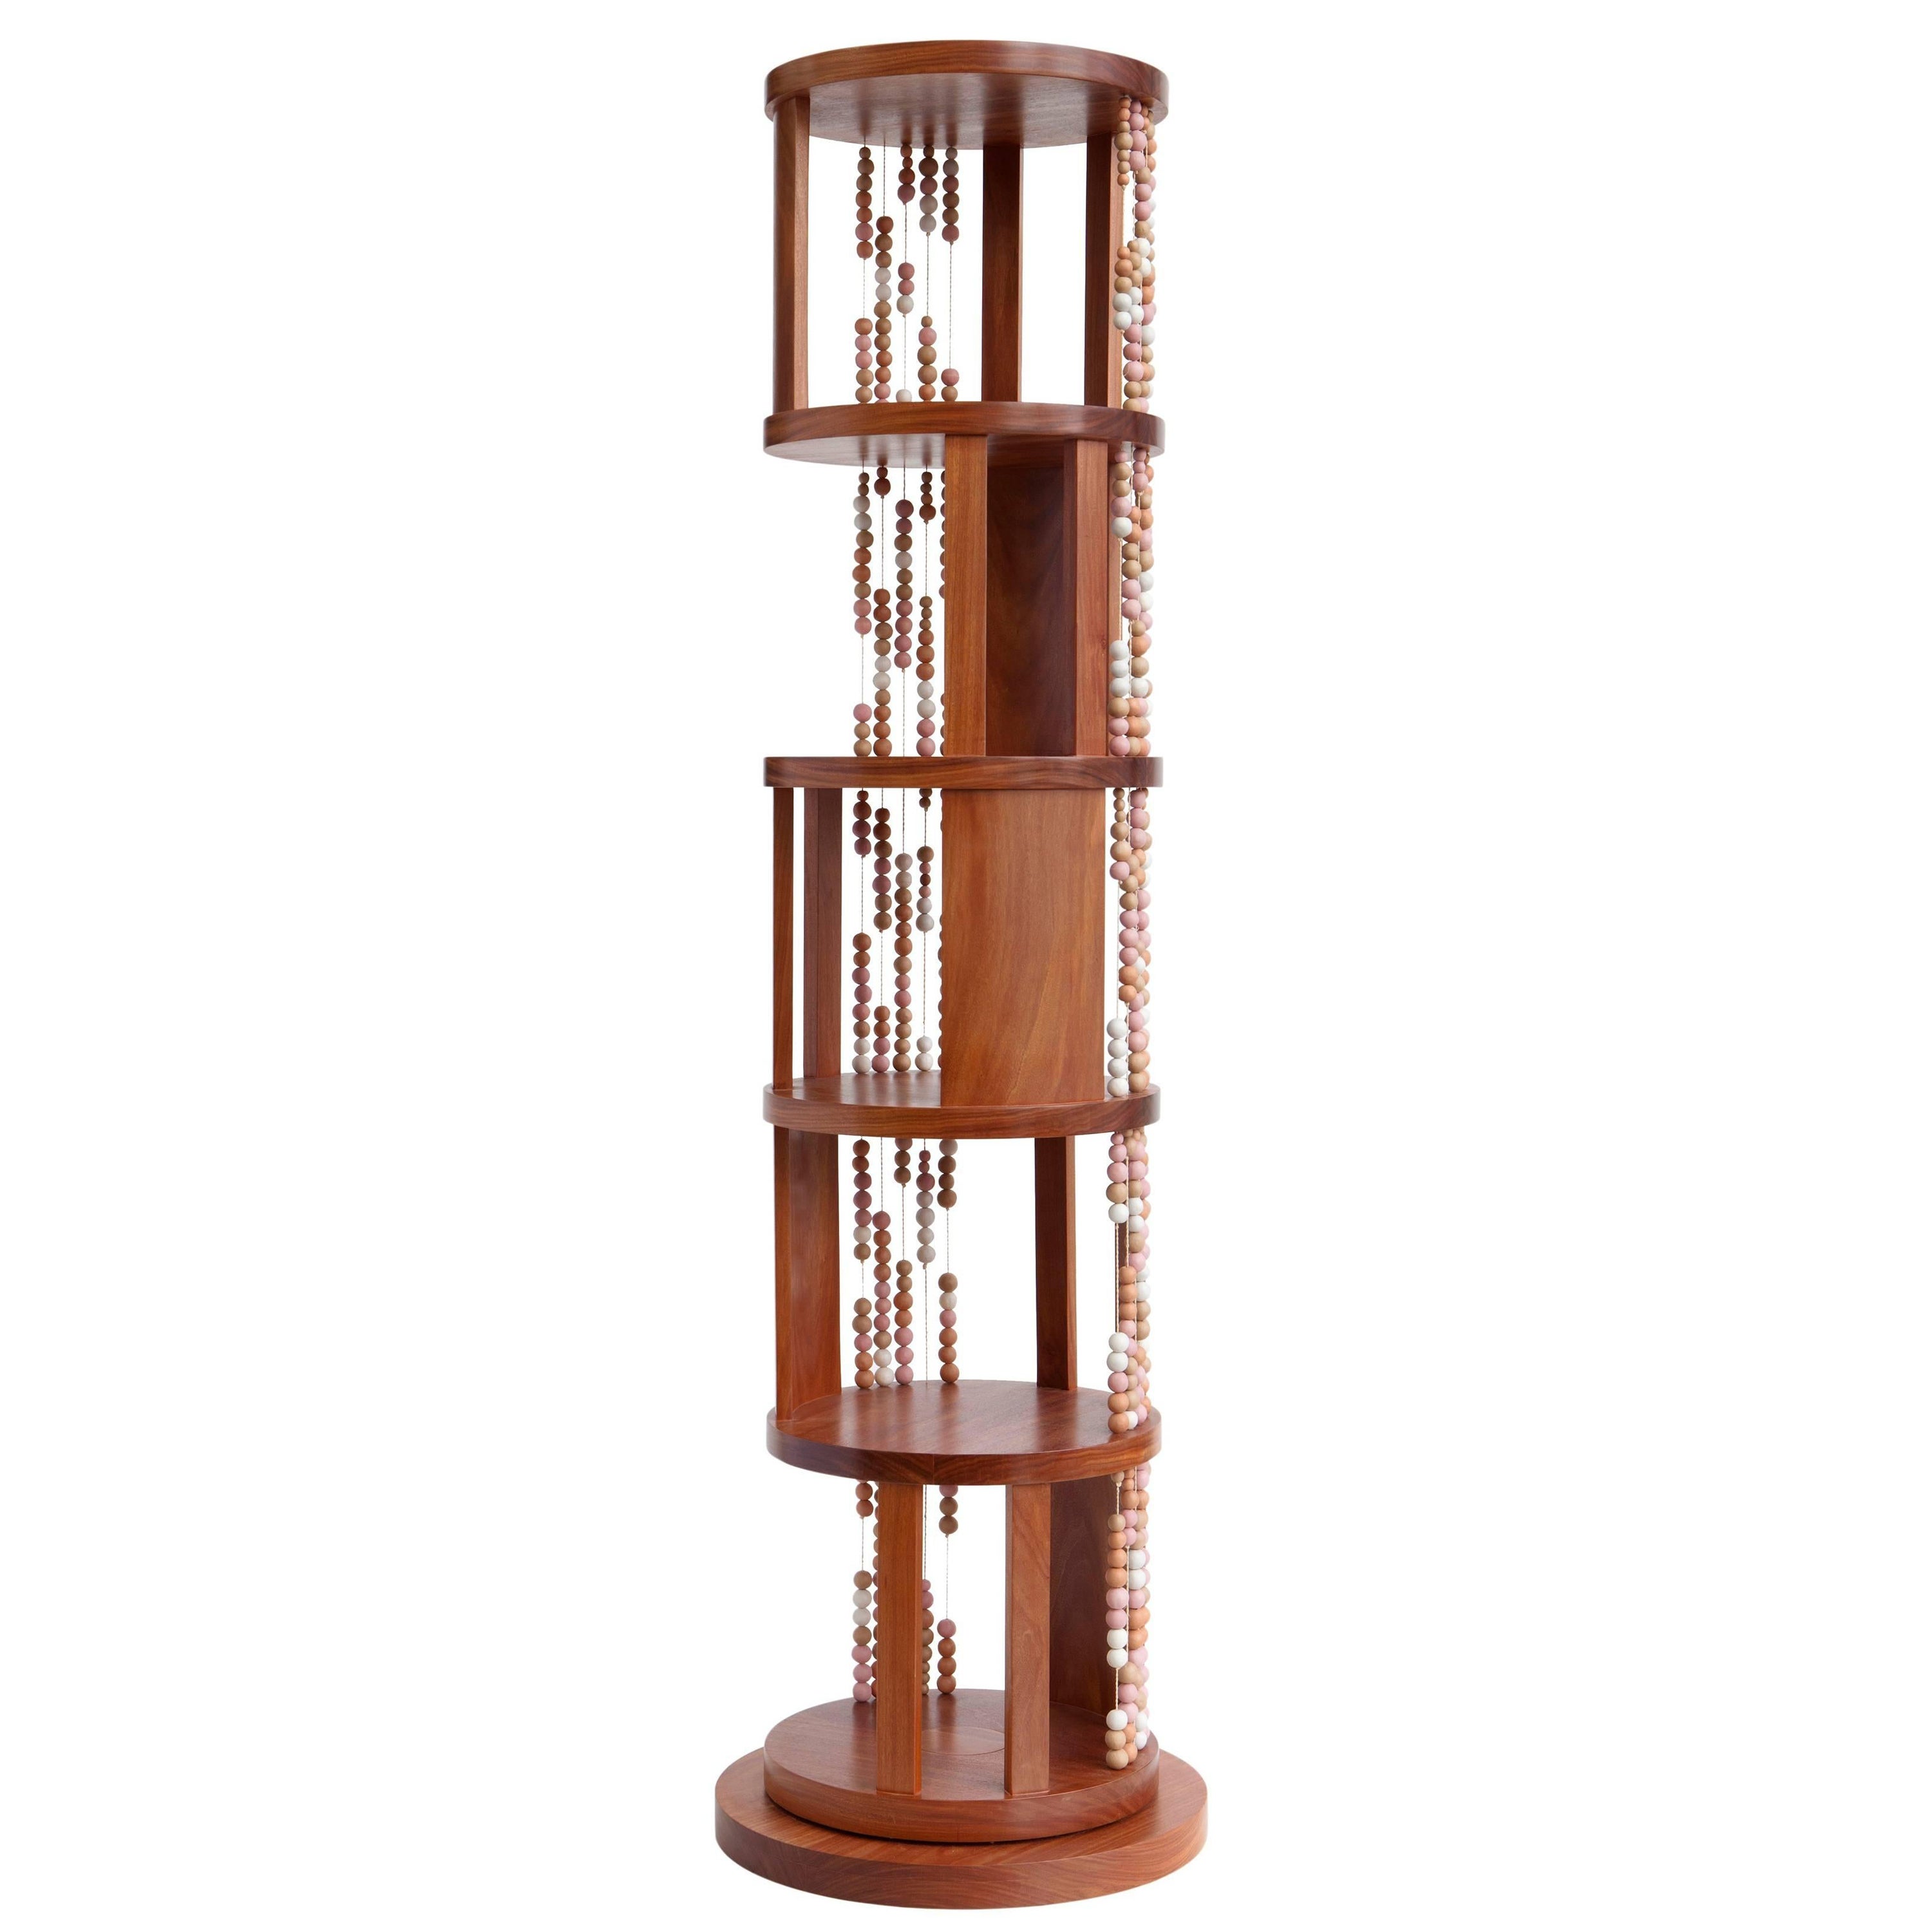 Contas Round Swivel Bookcase in Cabreuva wood - With artisans from Brazil